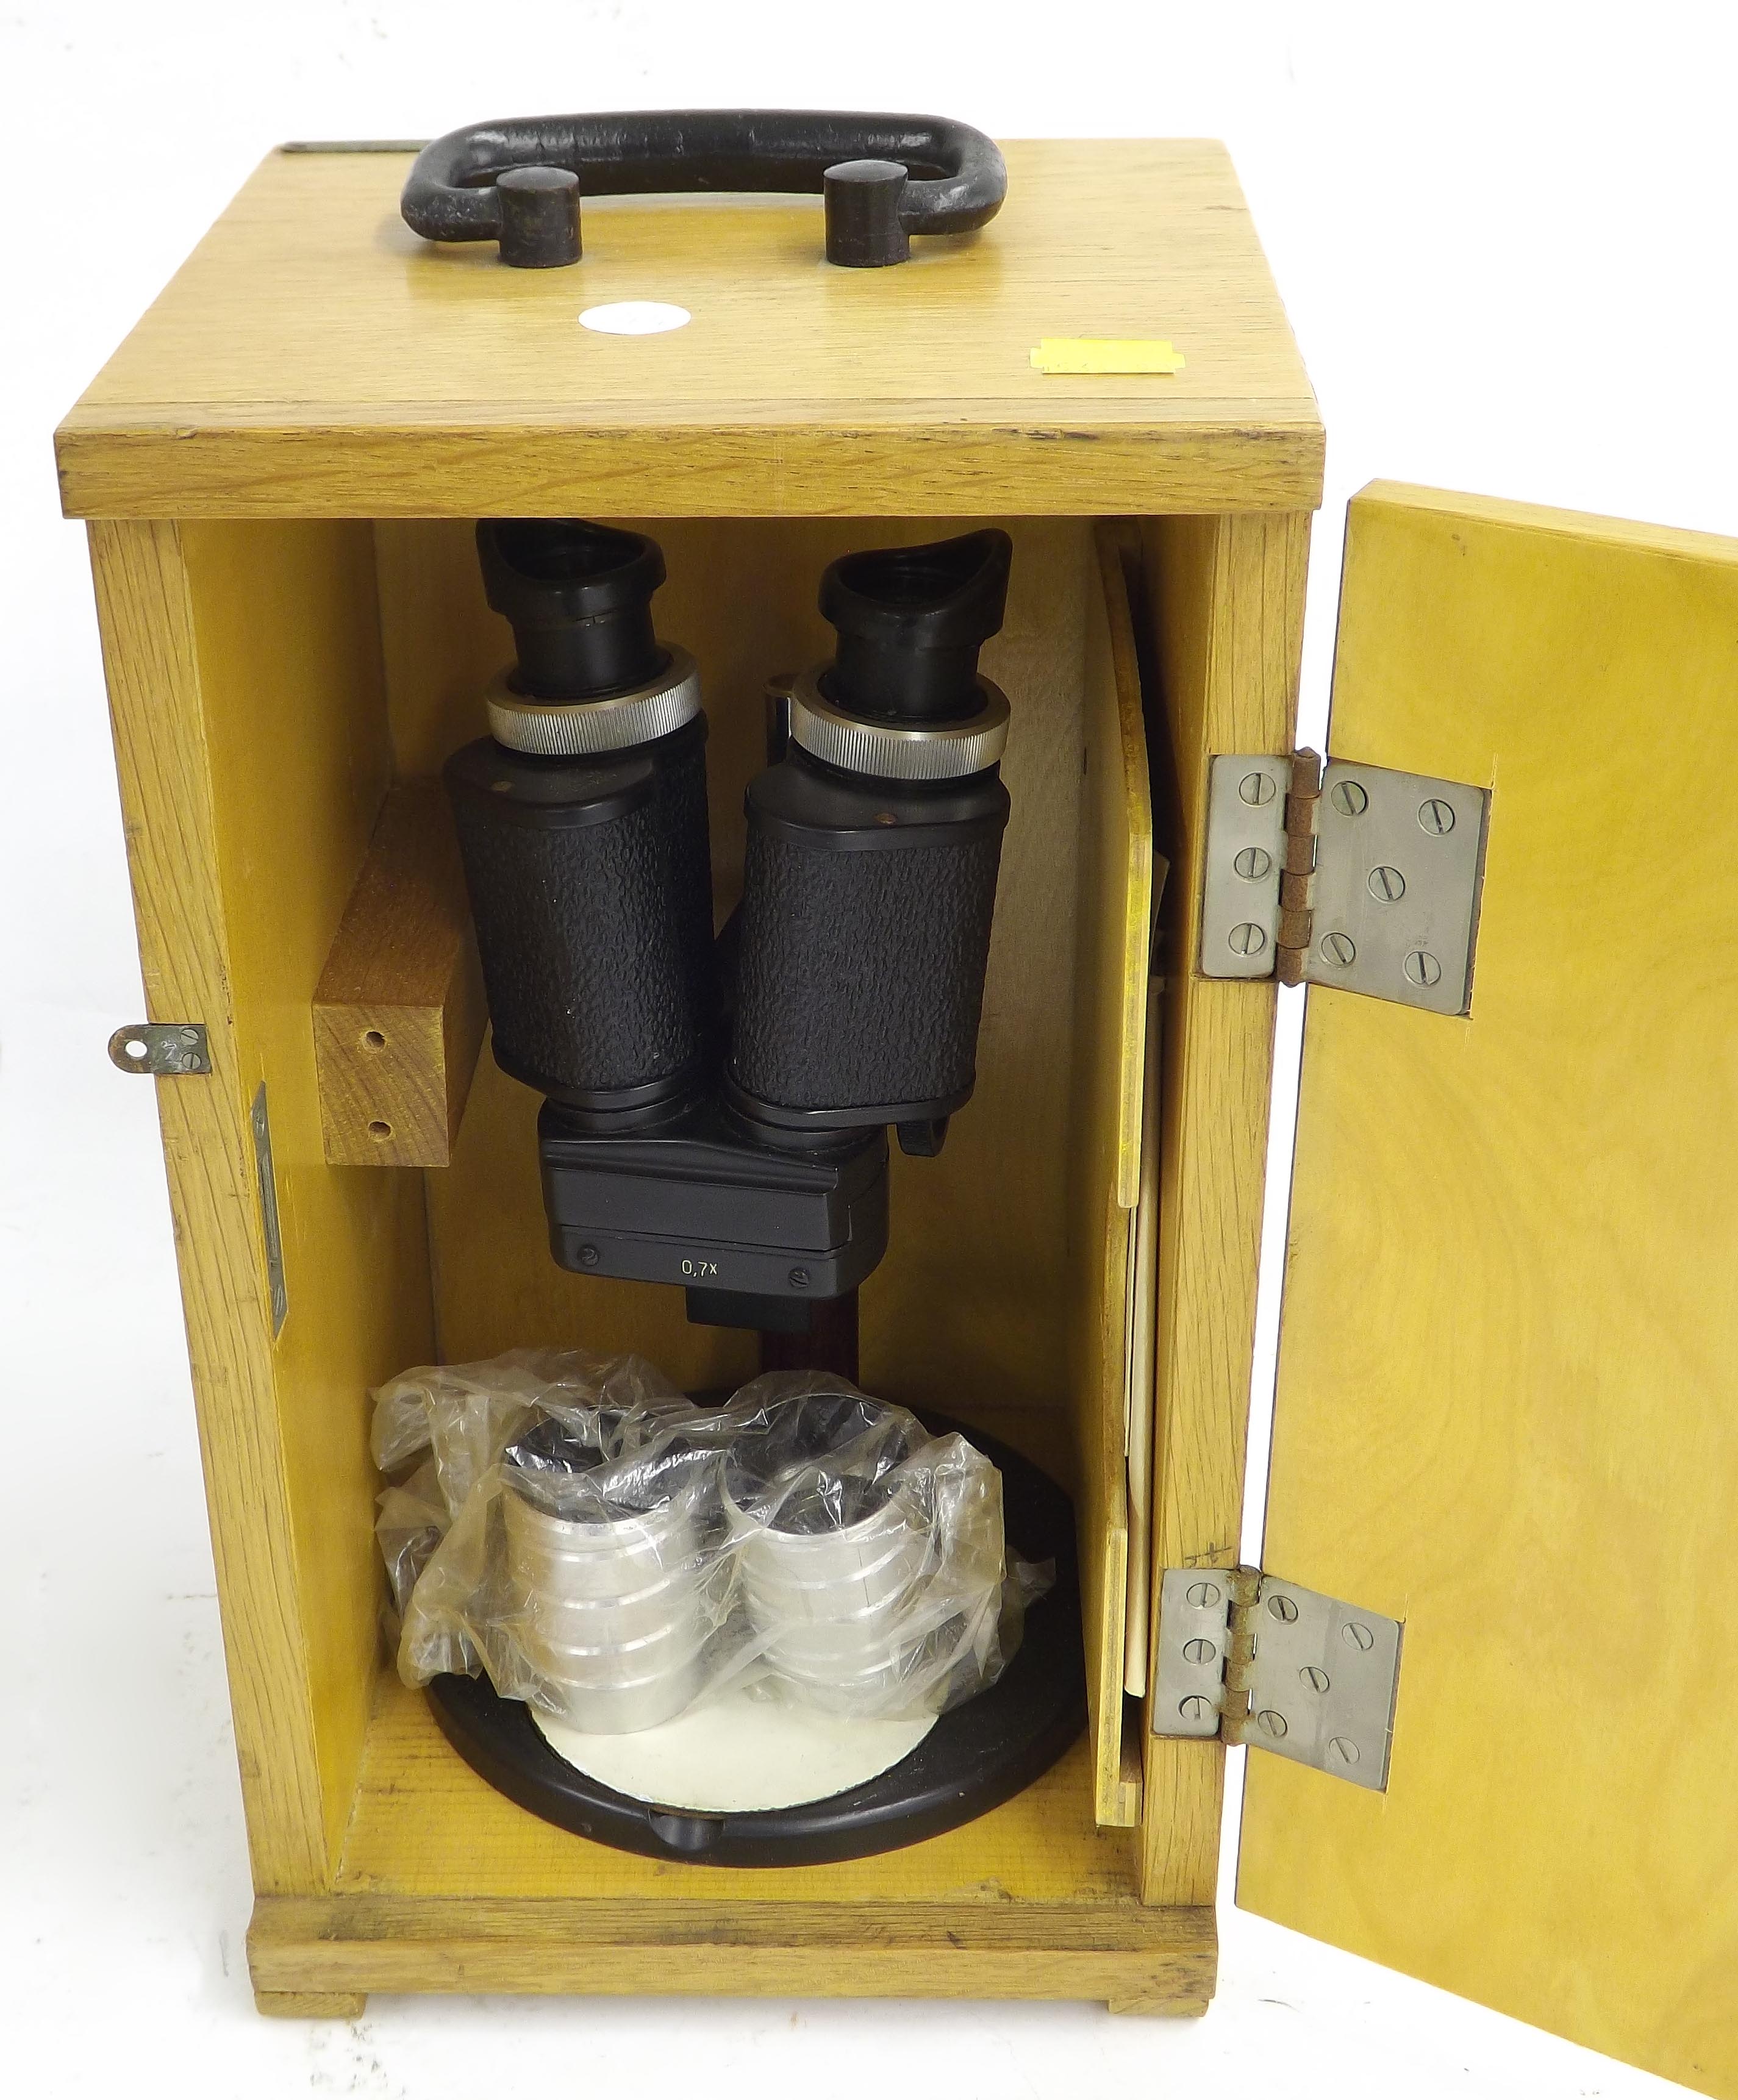 Type BM-51-2 stereo microscope, made in Moscow, USSR, within a wooden box